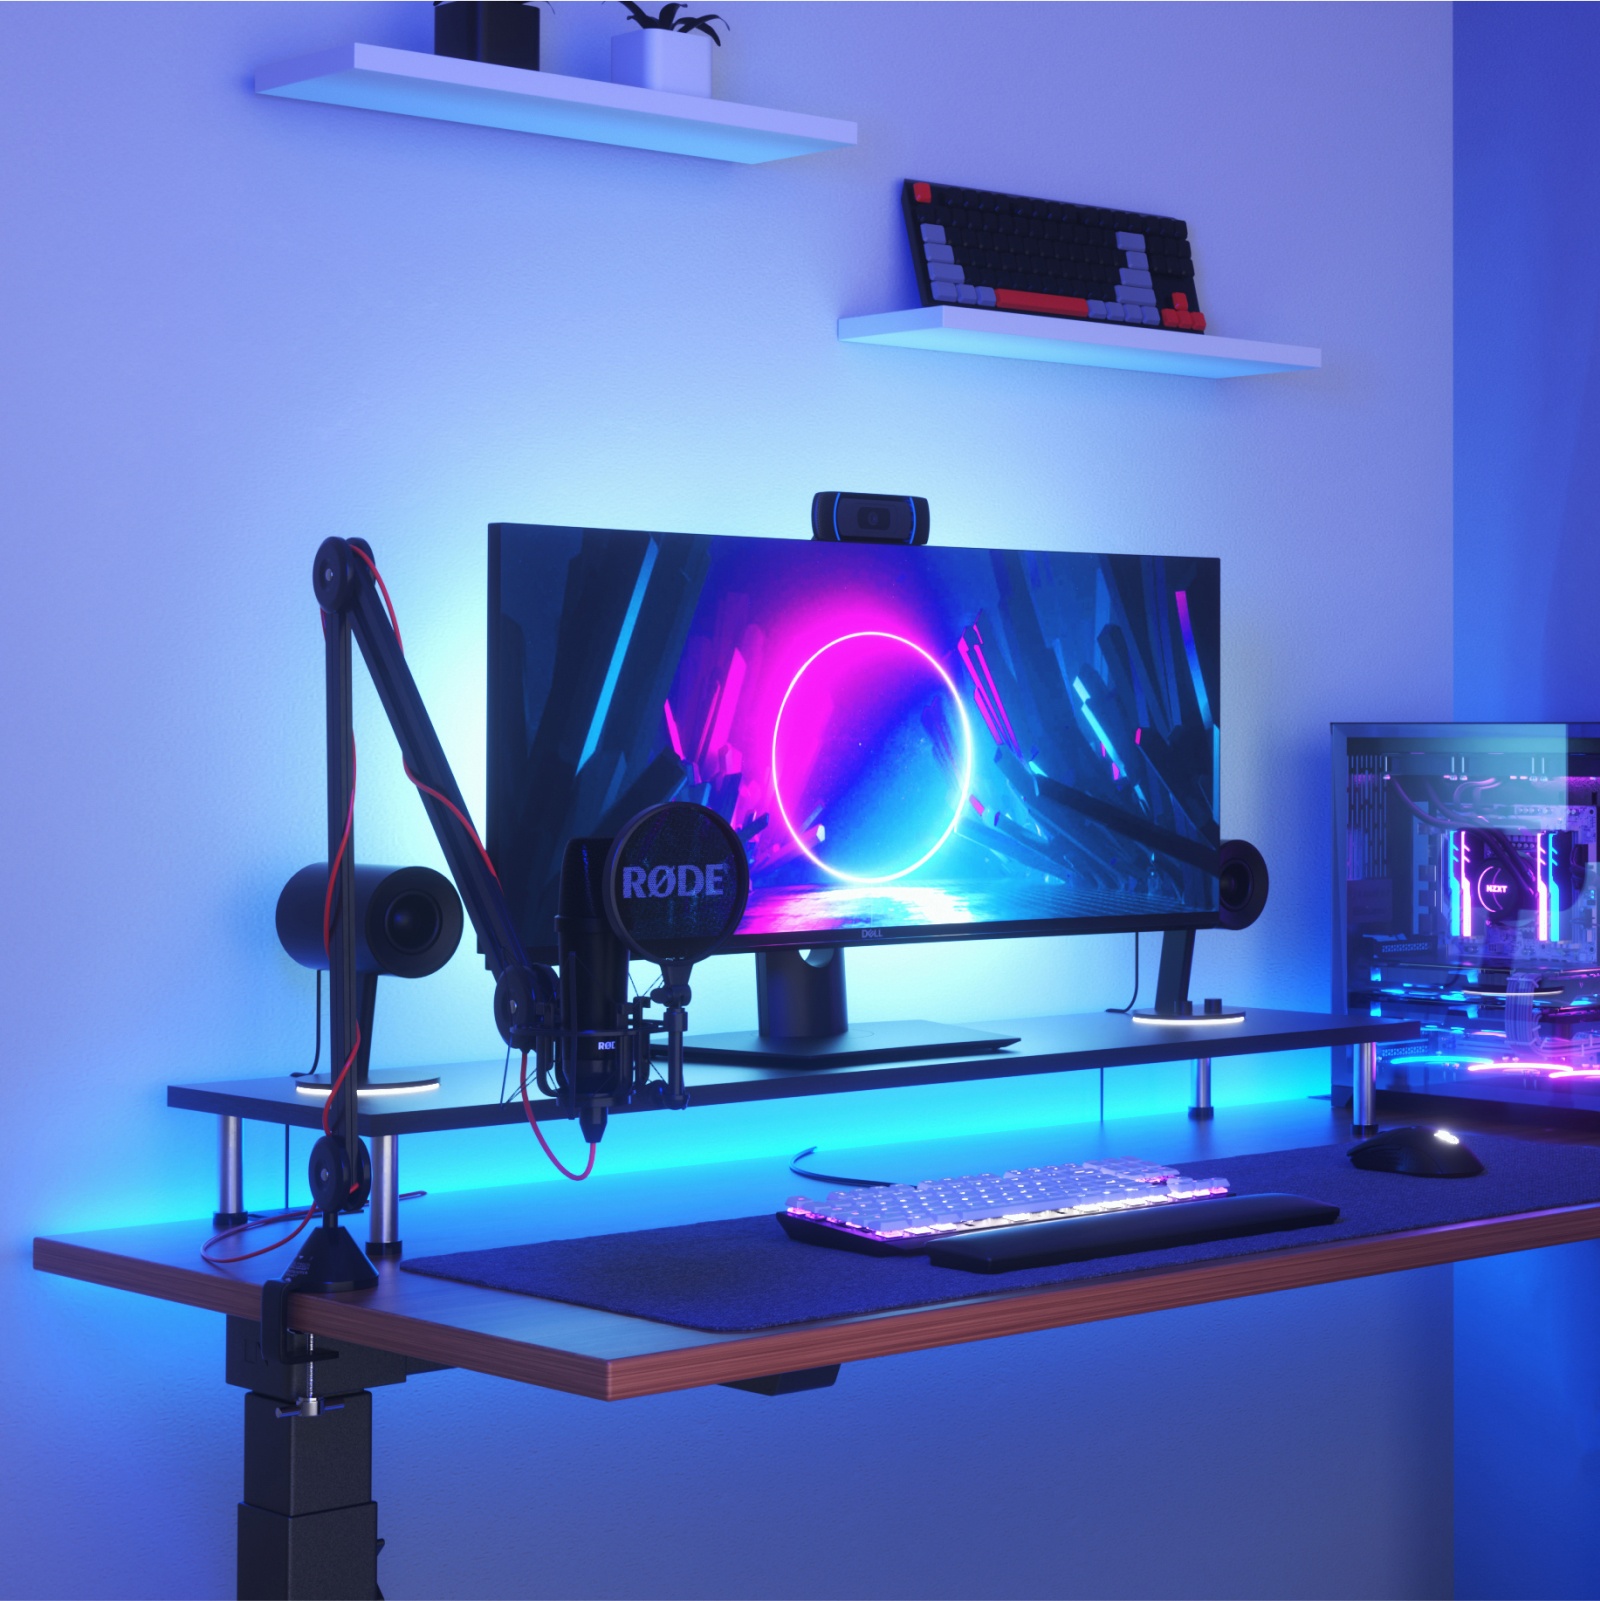 Put a light bar above the monitor to light up my desk area a bit, happy  with how it looks! Any suggestions? : r/battlestations